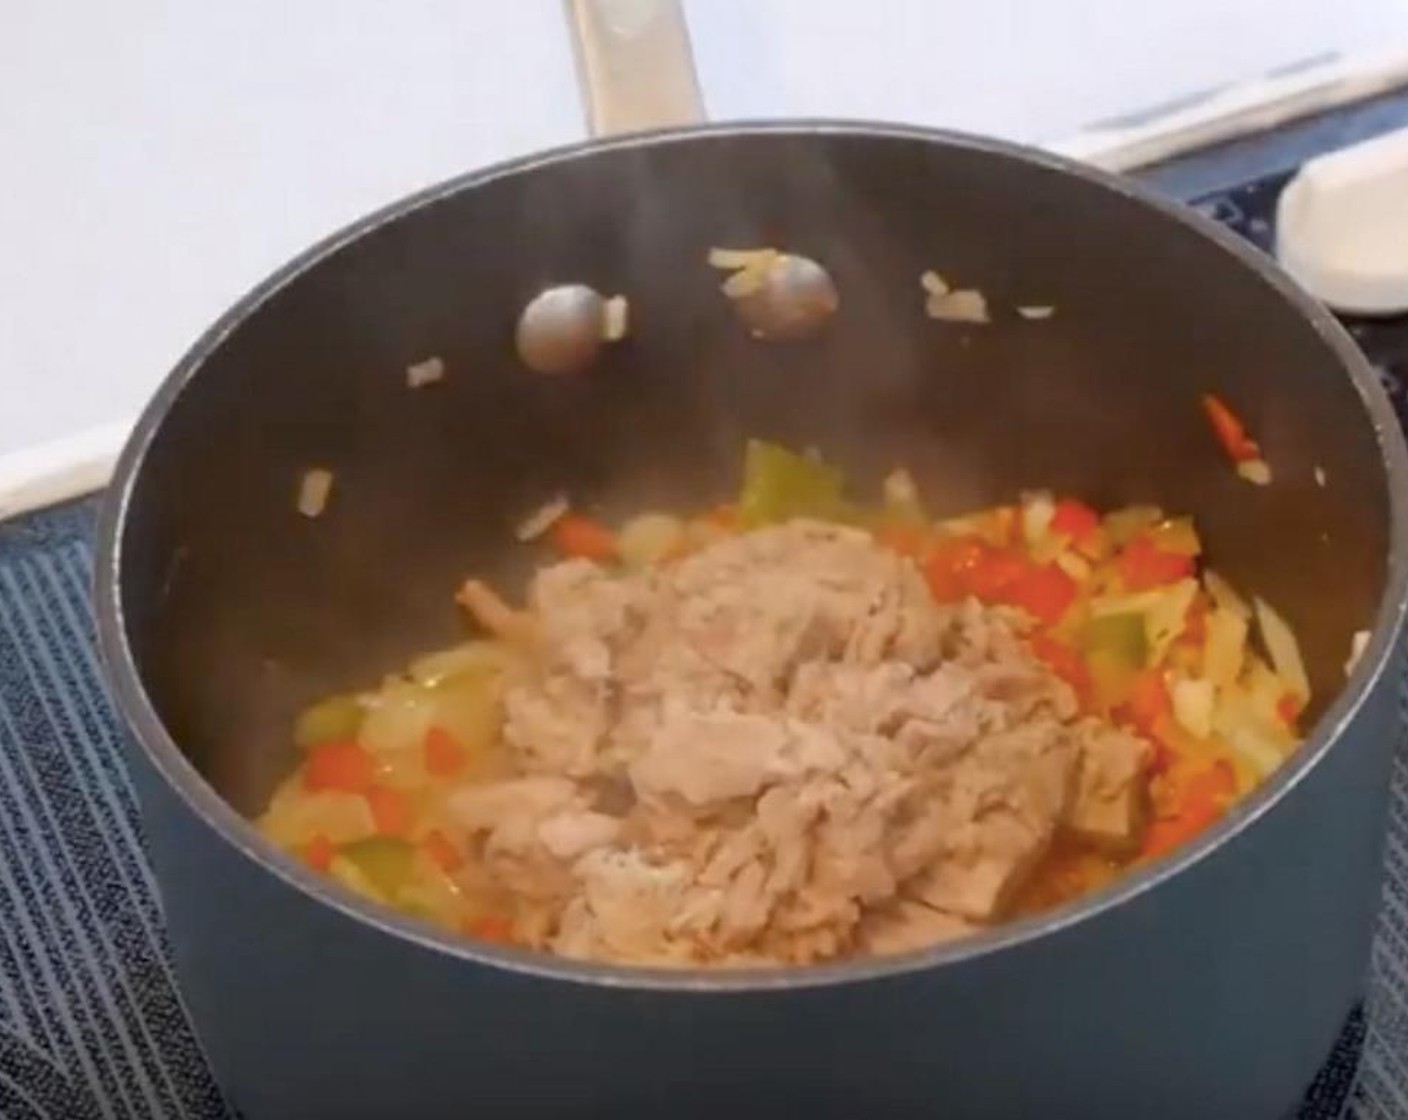 step 2 When the vegetables are soft, add the Canned Tuna (1 cup) and leave to cook for 10 to 15 minutes and leave to cool.